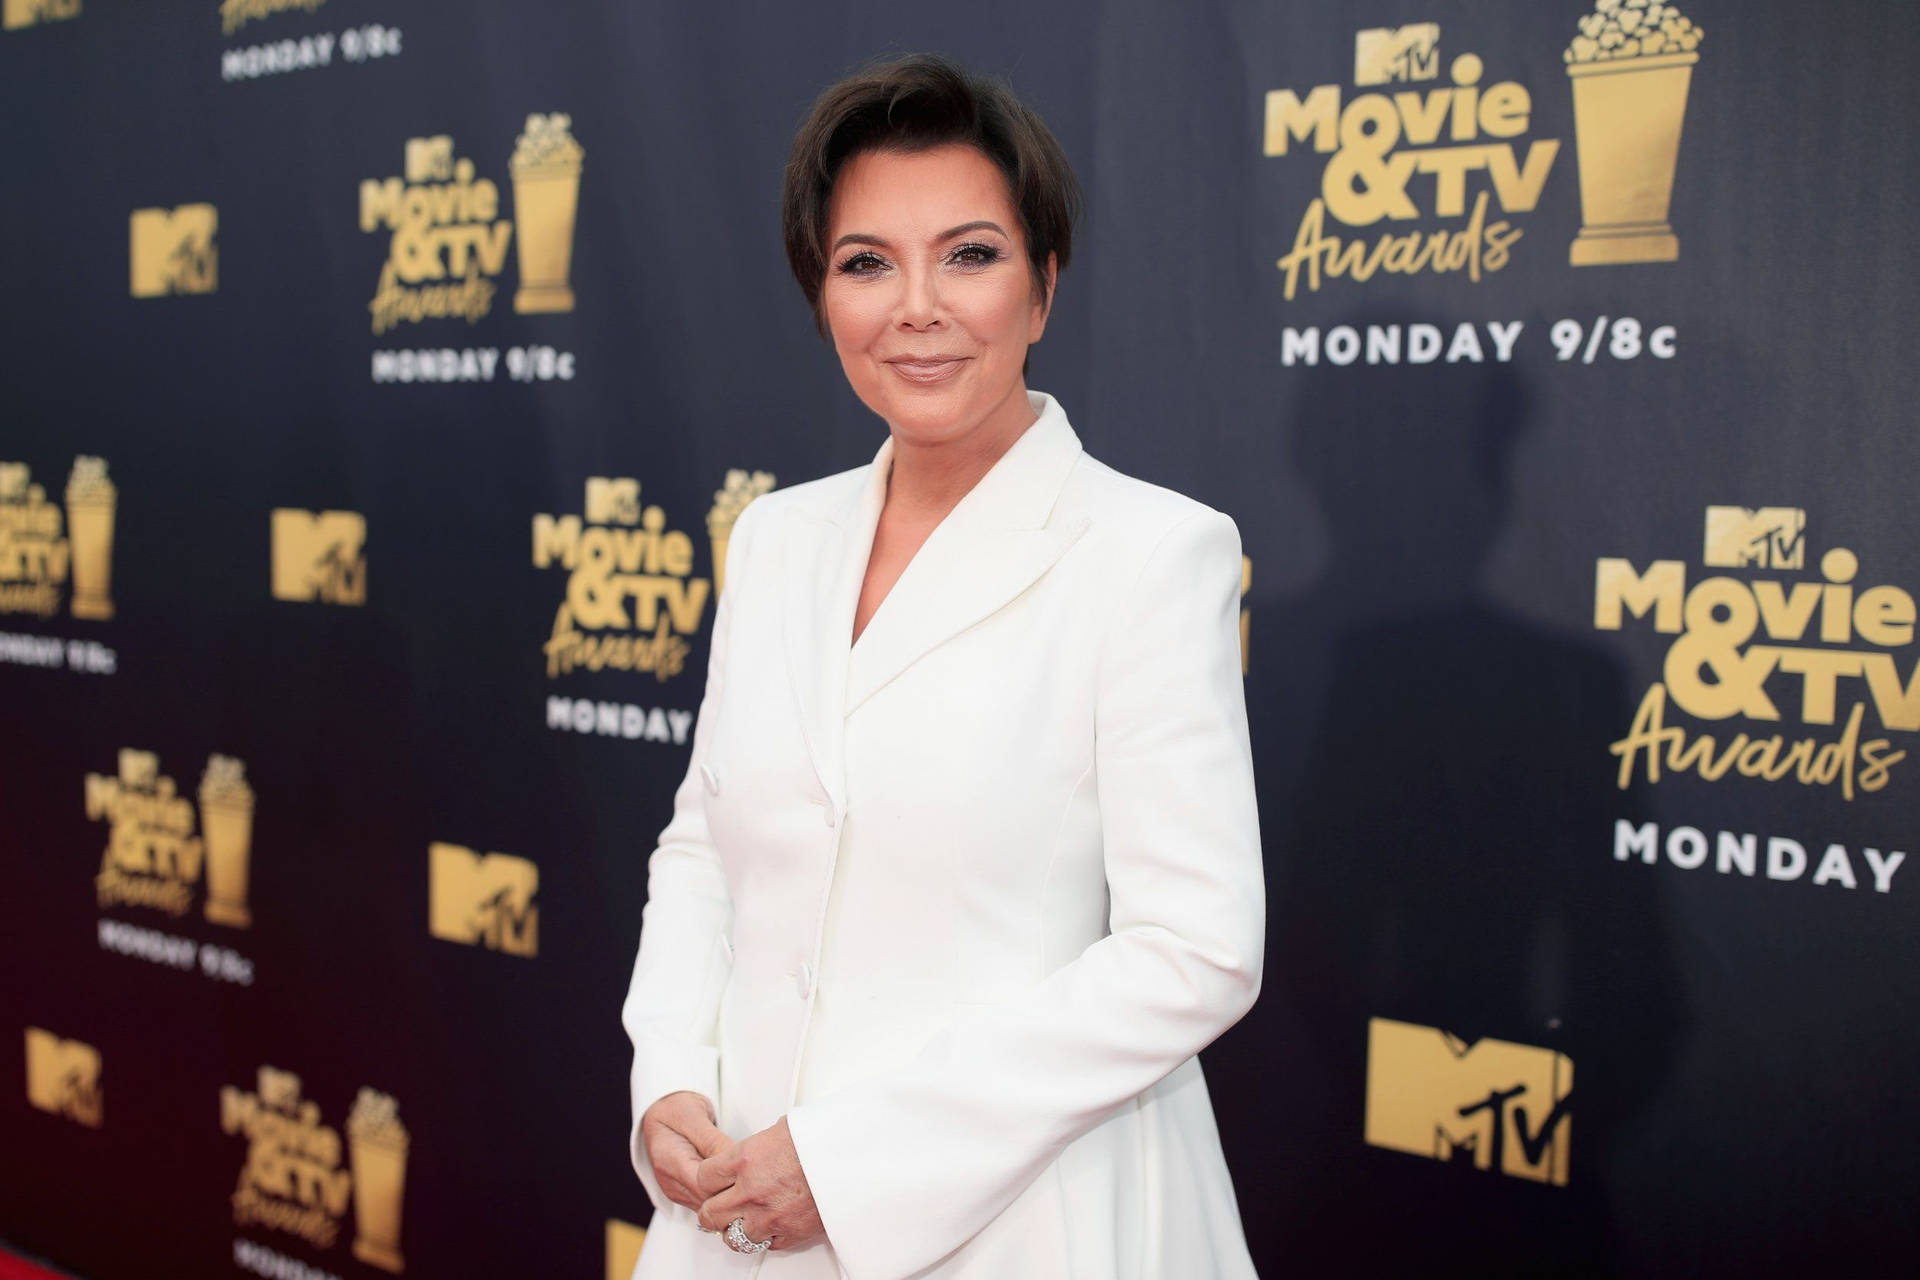 Kris Jenner at the Movie and TV Awards looking glamorous Wallpaper